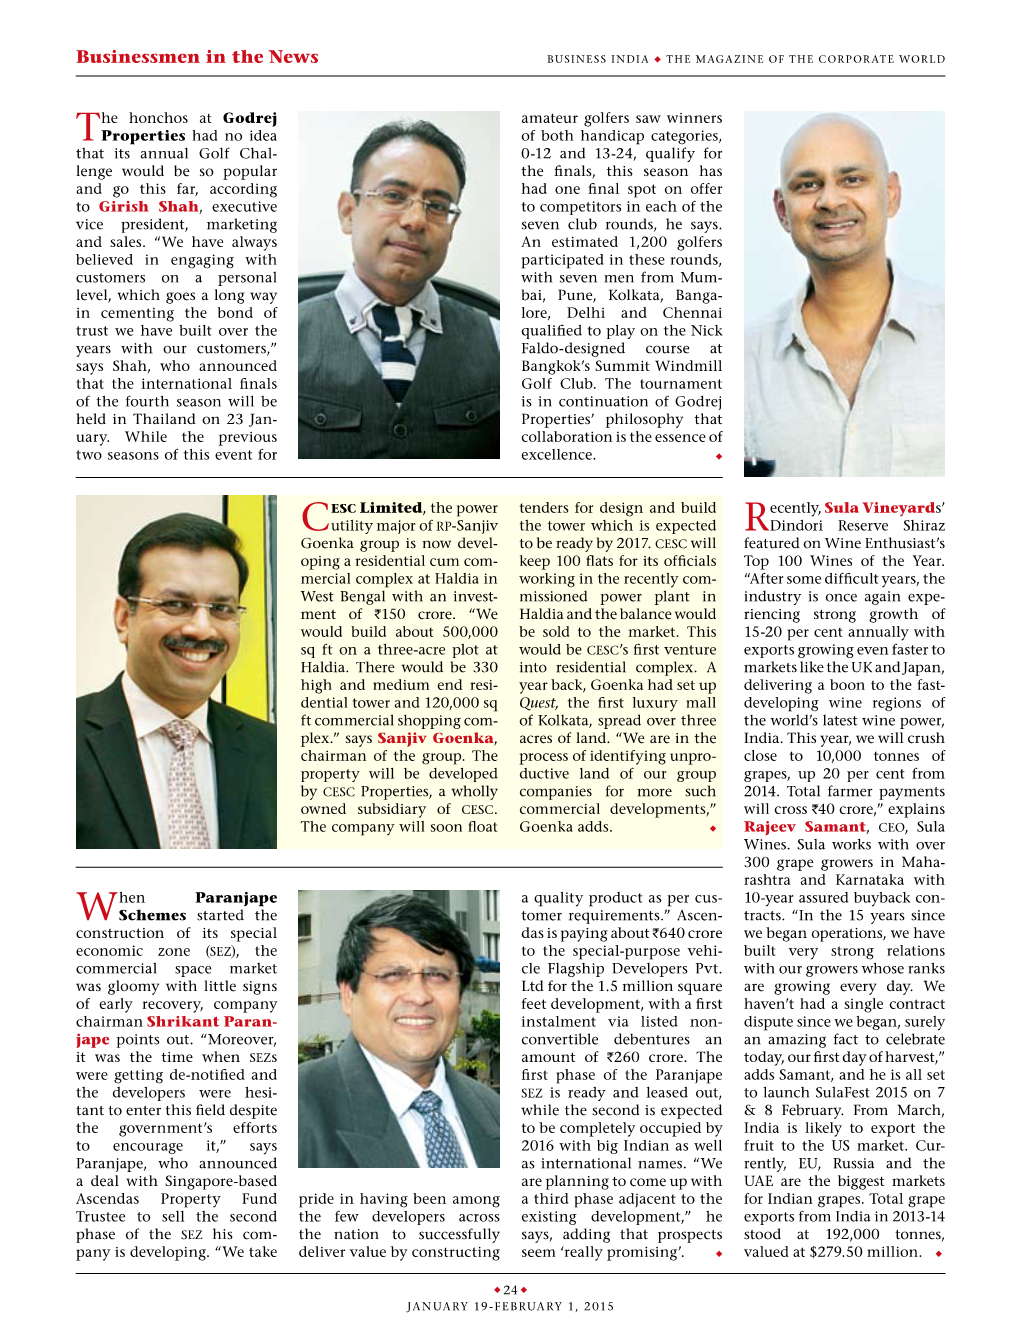 Businessmen in the News Business India U the Magazine of the Corporate World